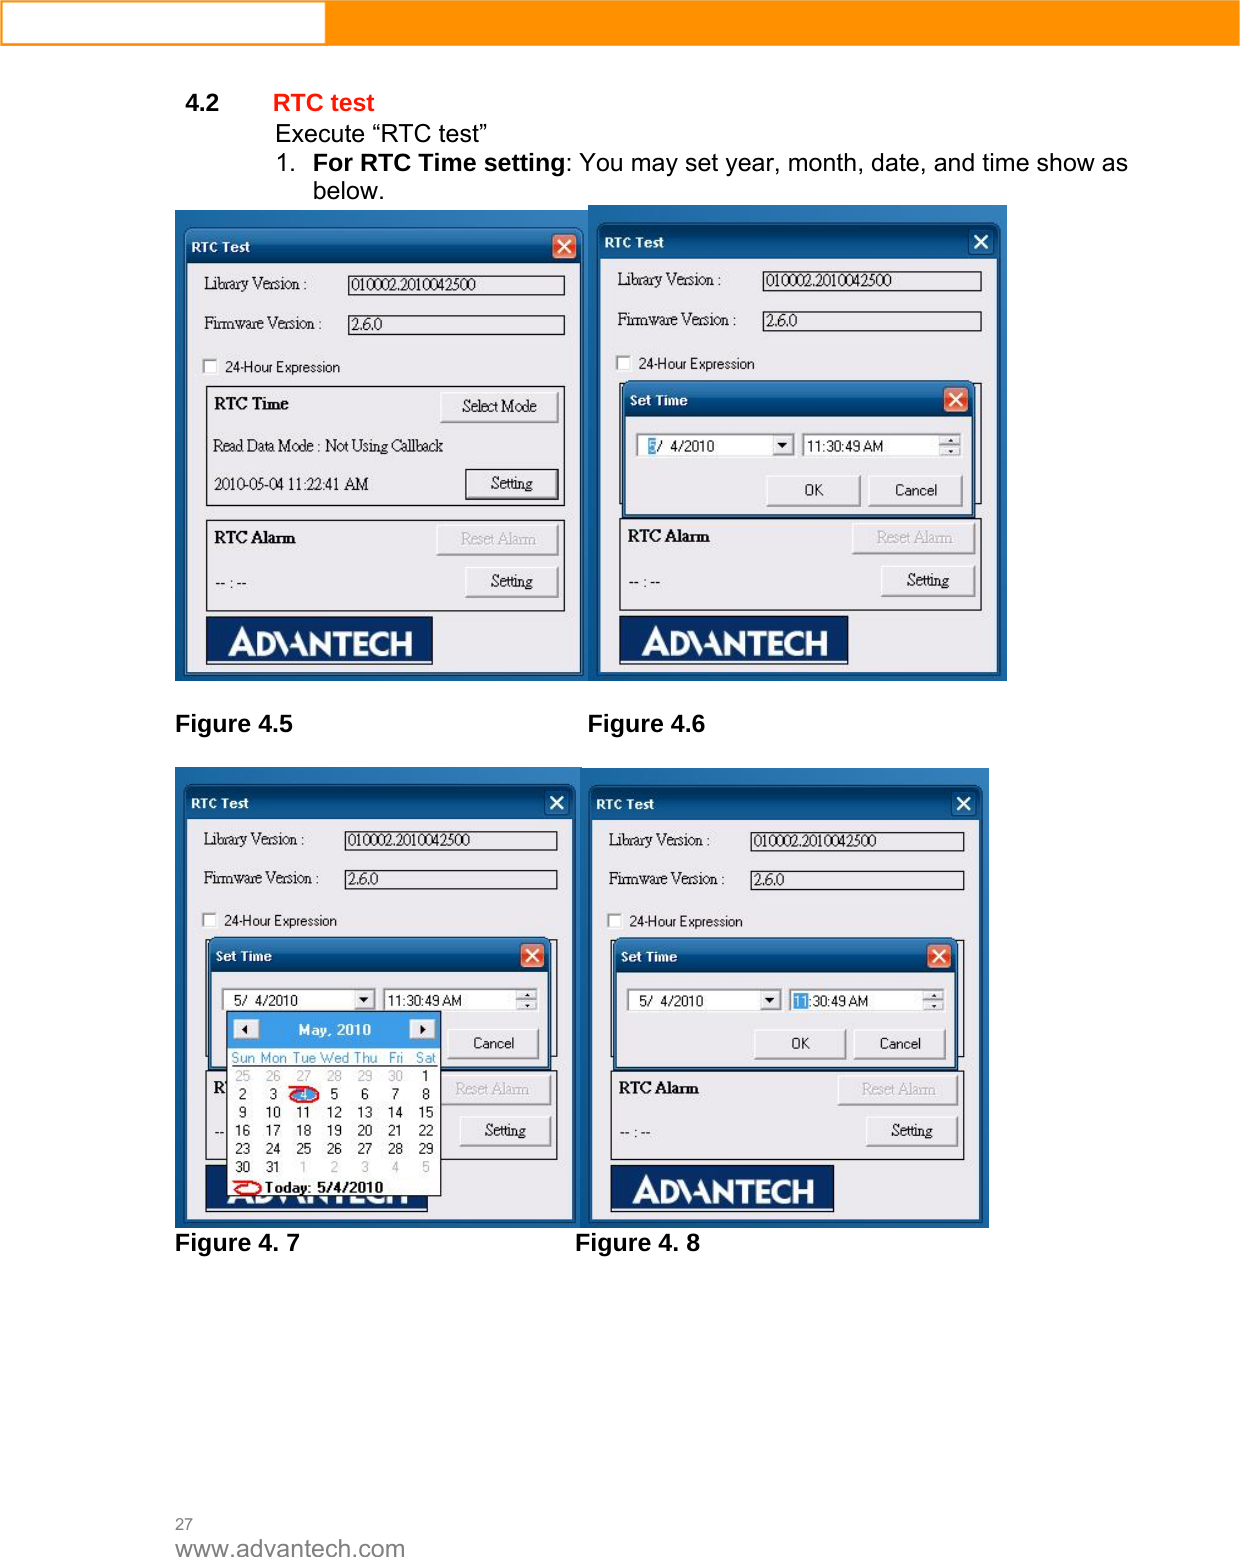  27 www.advantech.com  4.2 RTC test Execute “RTC test” 1.  For RTC Time setting: You may set year, month, date, and time show as below.    Figure 4.5        Figure 4.6    Figure 4. 7      Figure 4. 8 